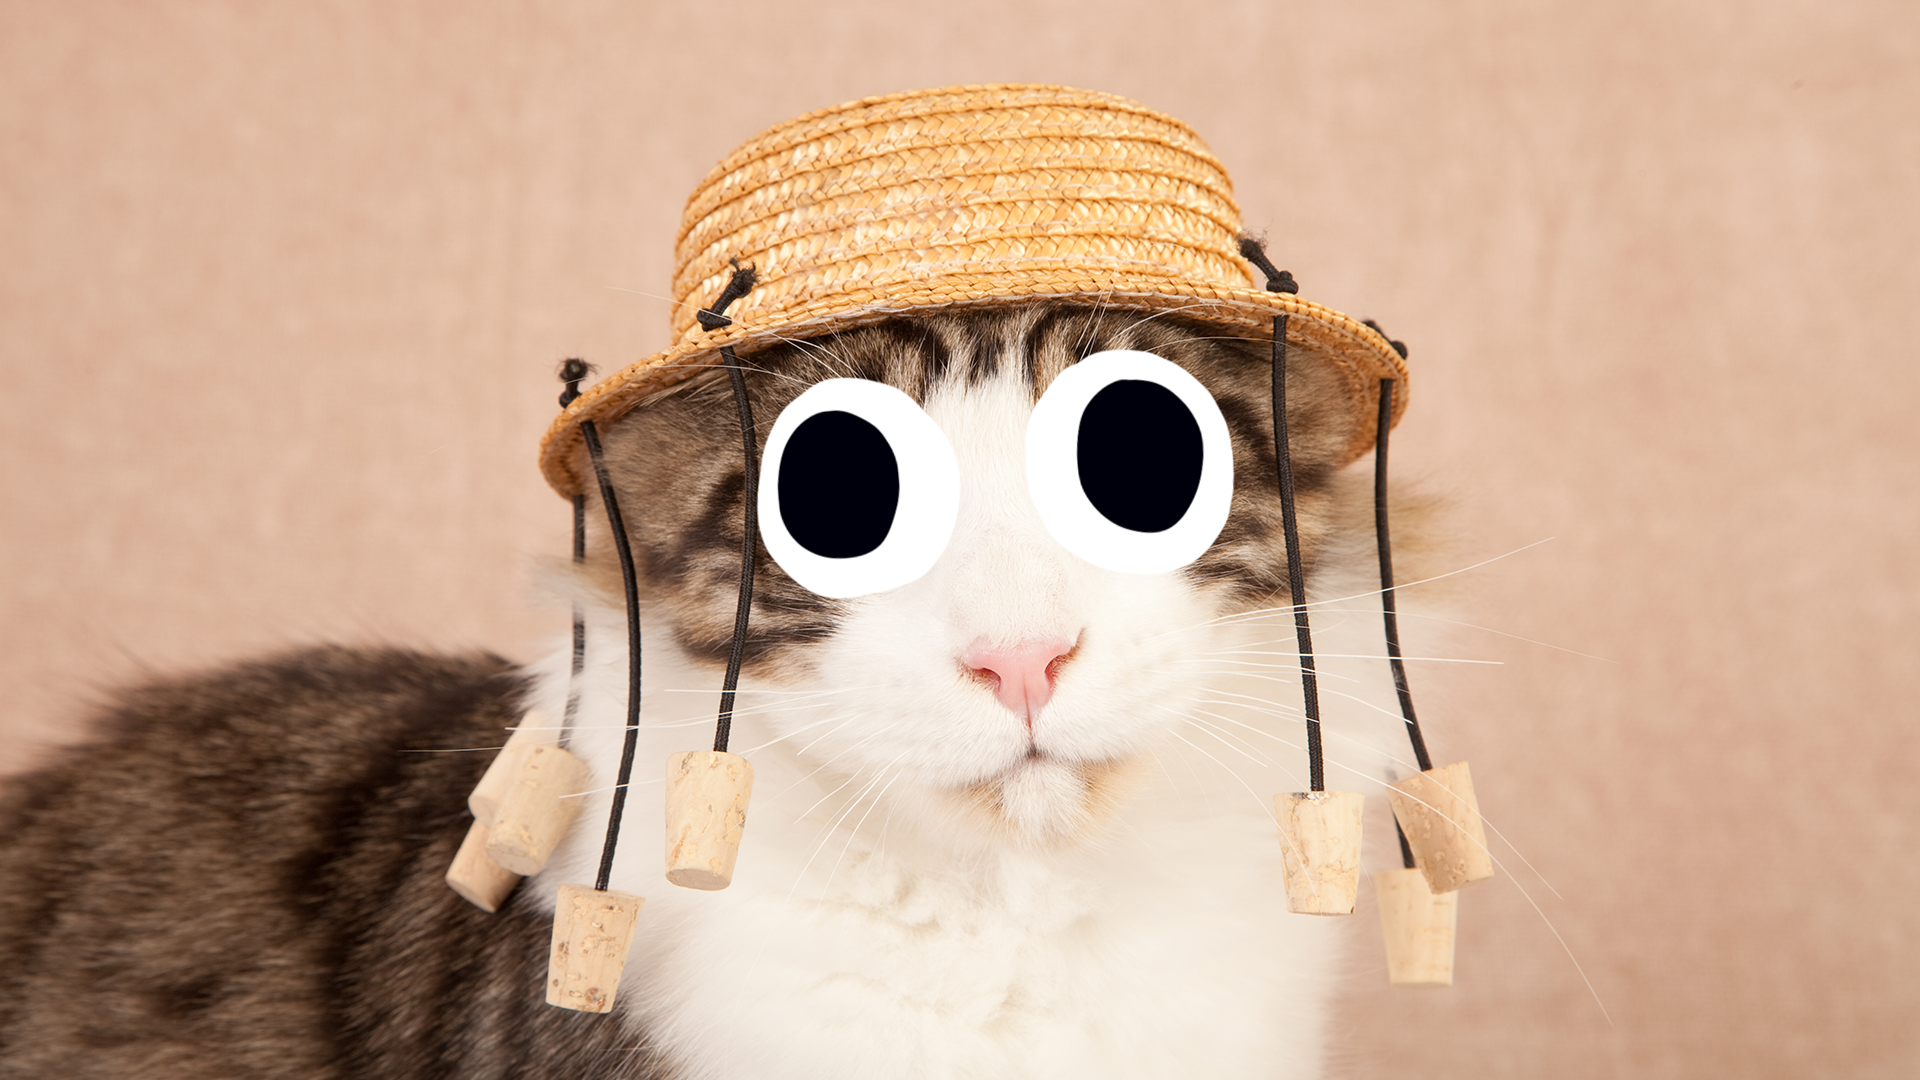 A cat wearing a corked hat